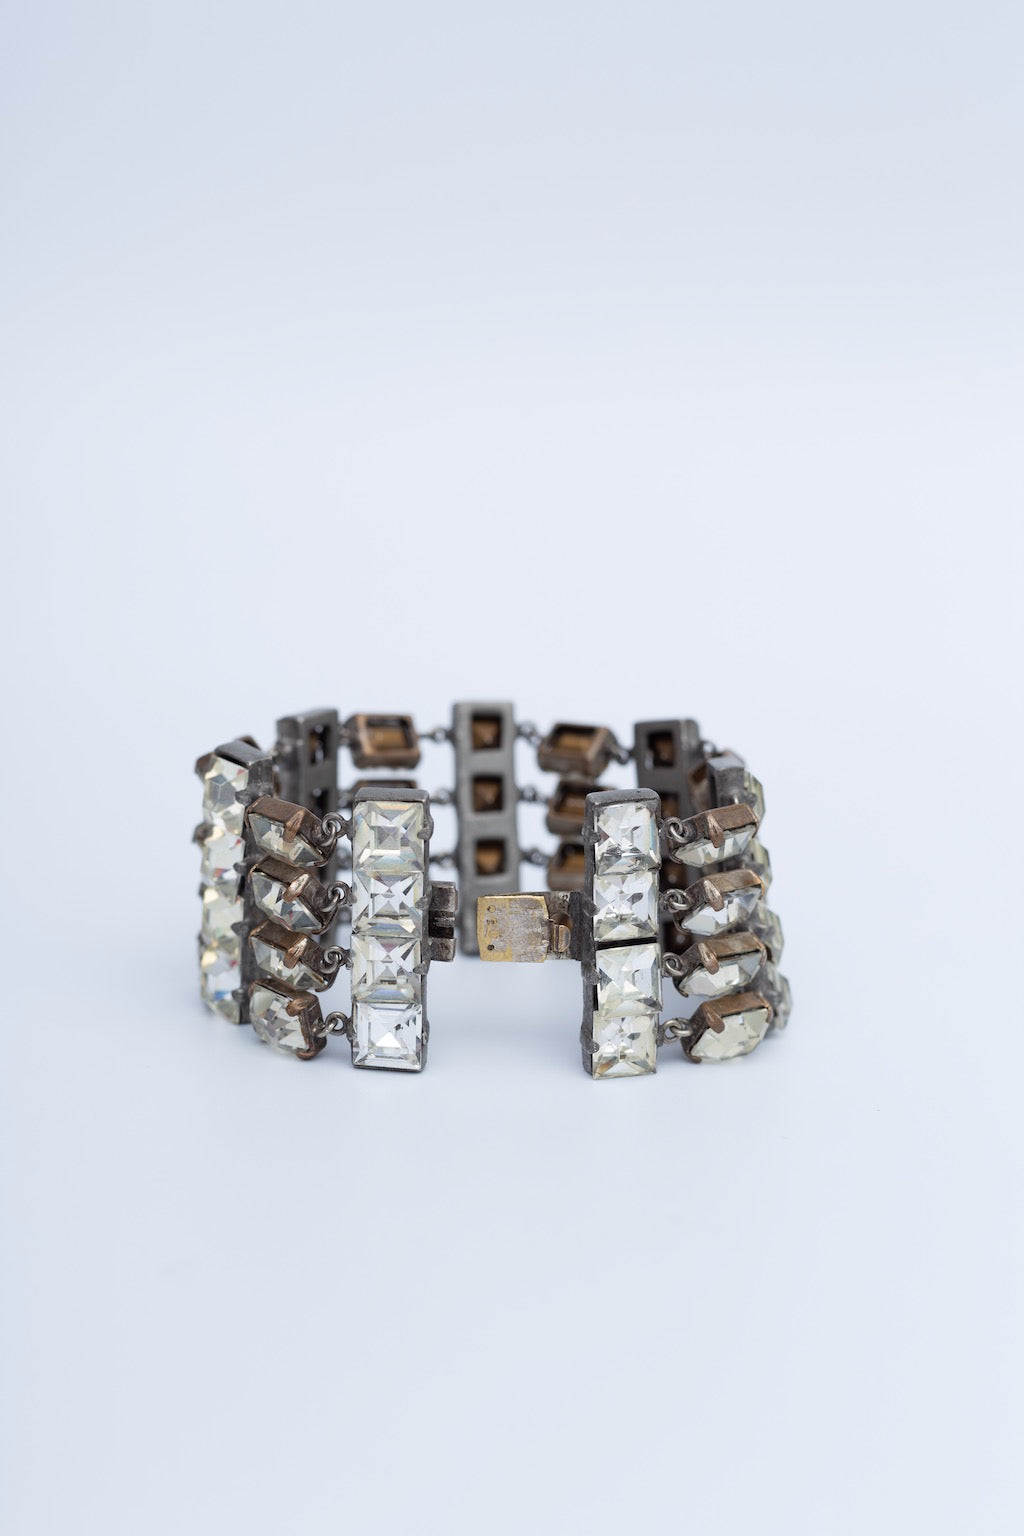 Chanel silver-plated bracelet (Attributed to)